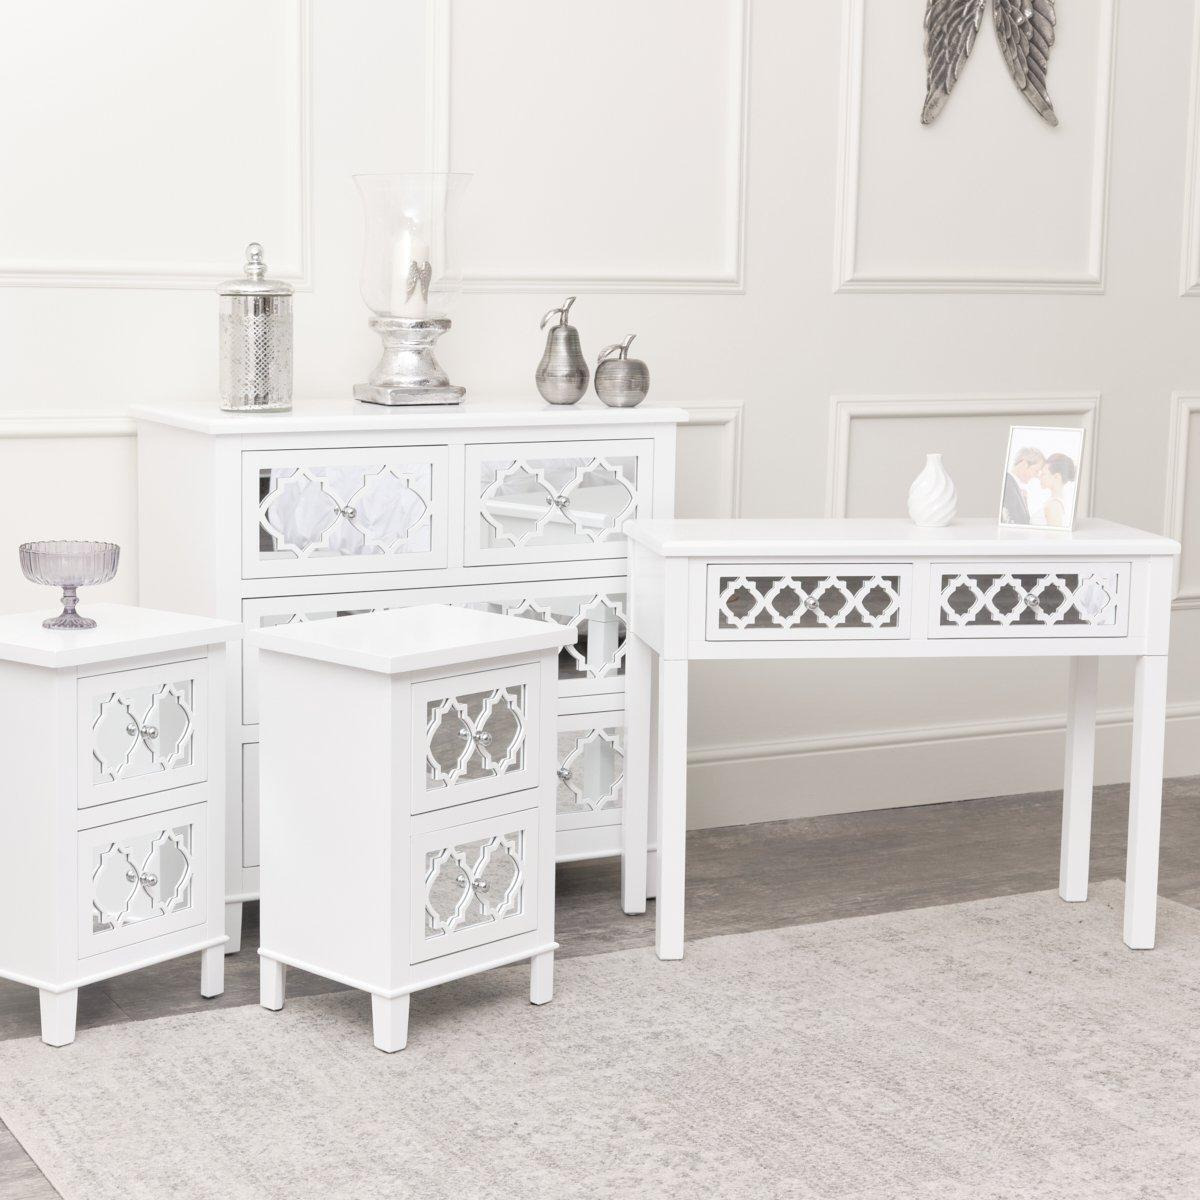 Large White Mirrored Chest Of Drawers, Console / Dressing Table & Pair Of Bedside Tables - Sabrina White Range - image 1